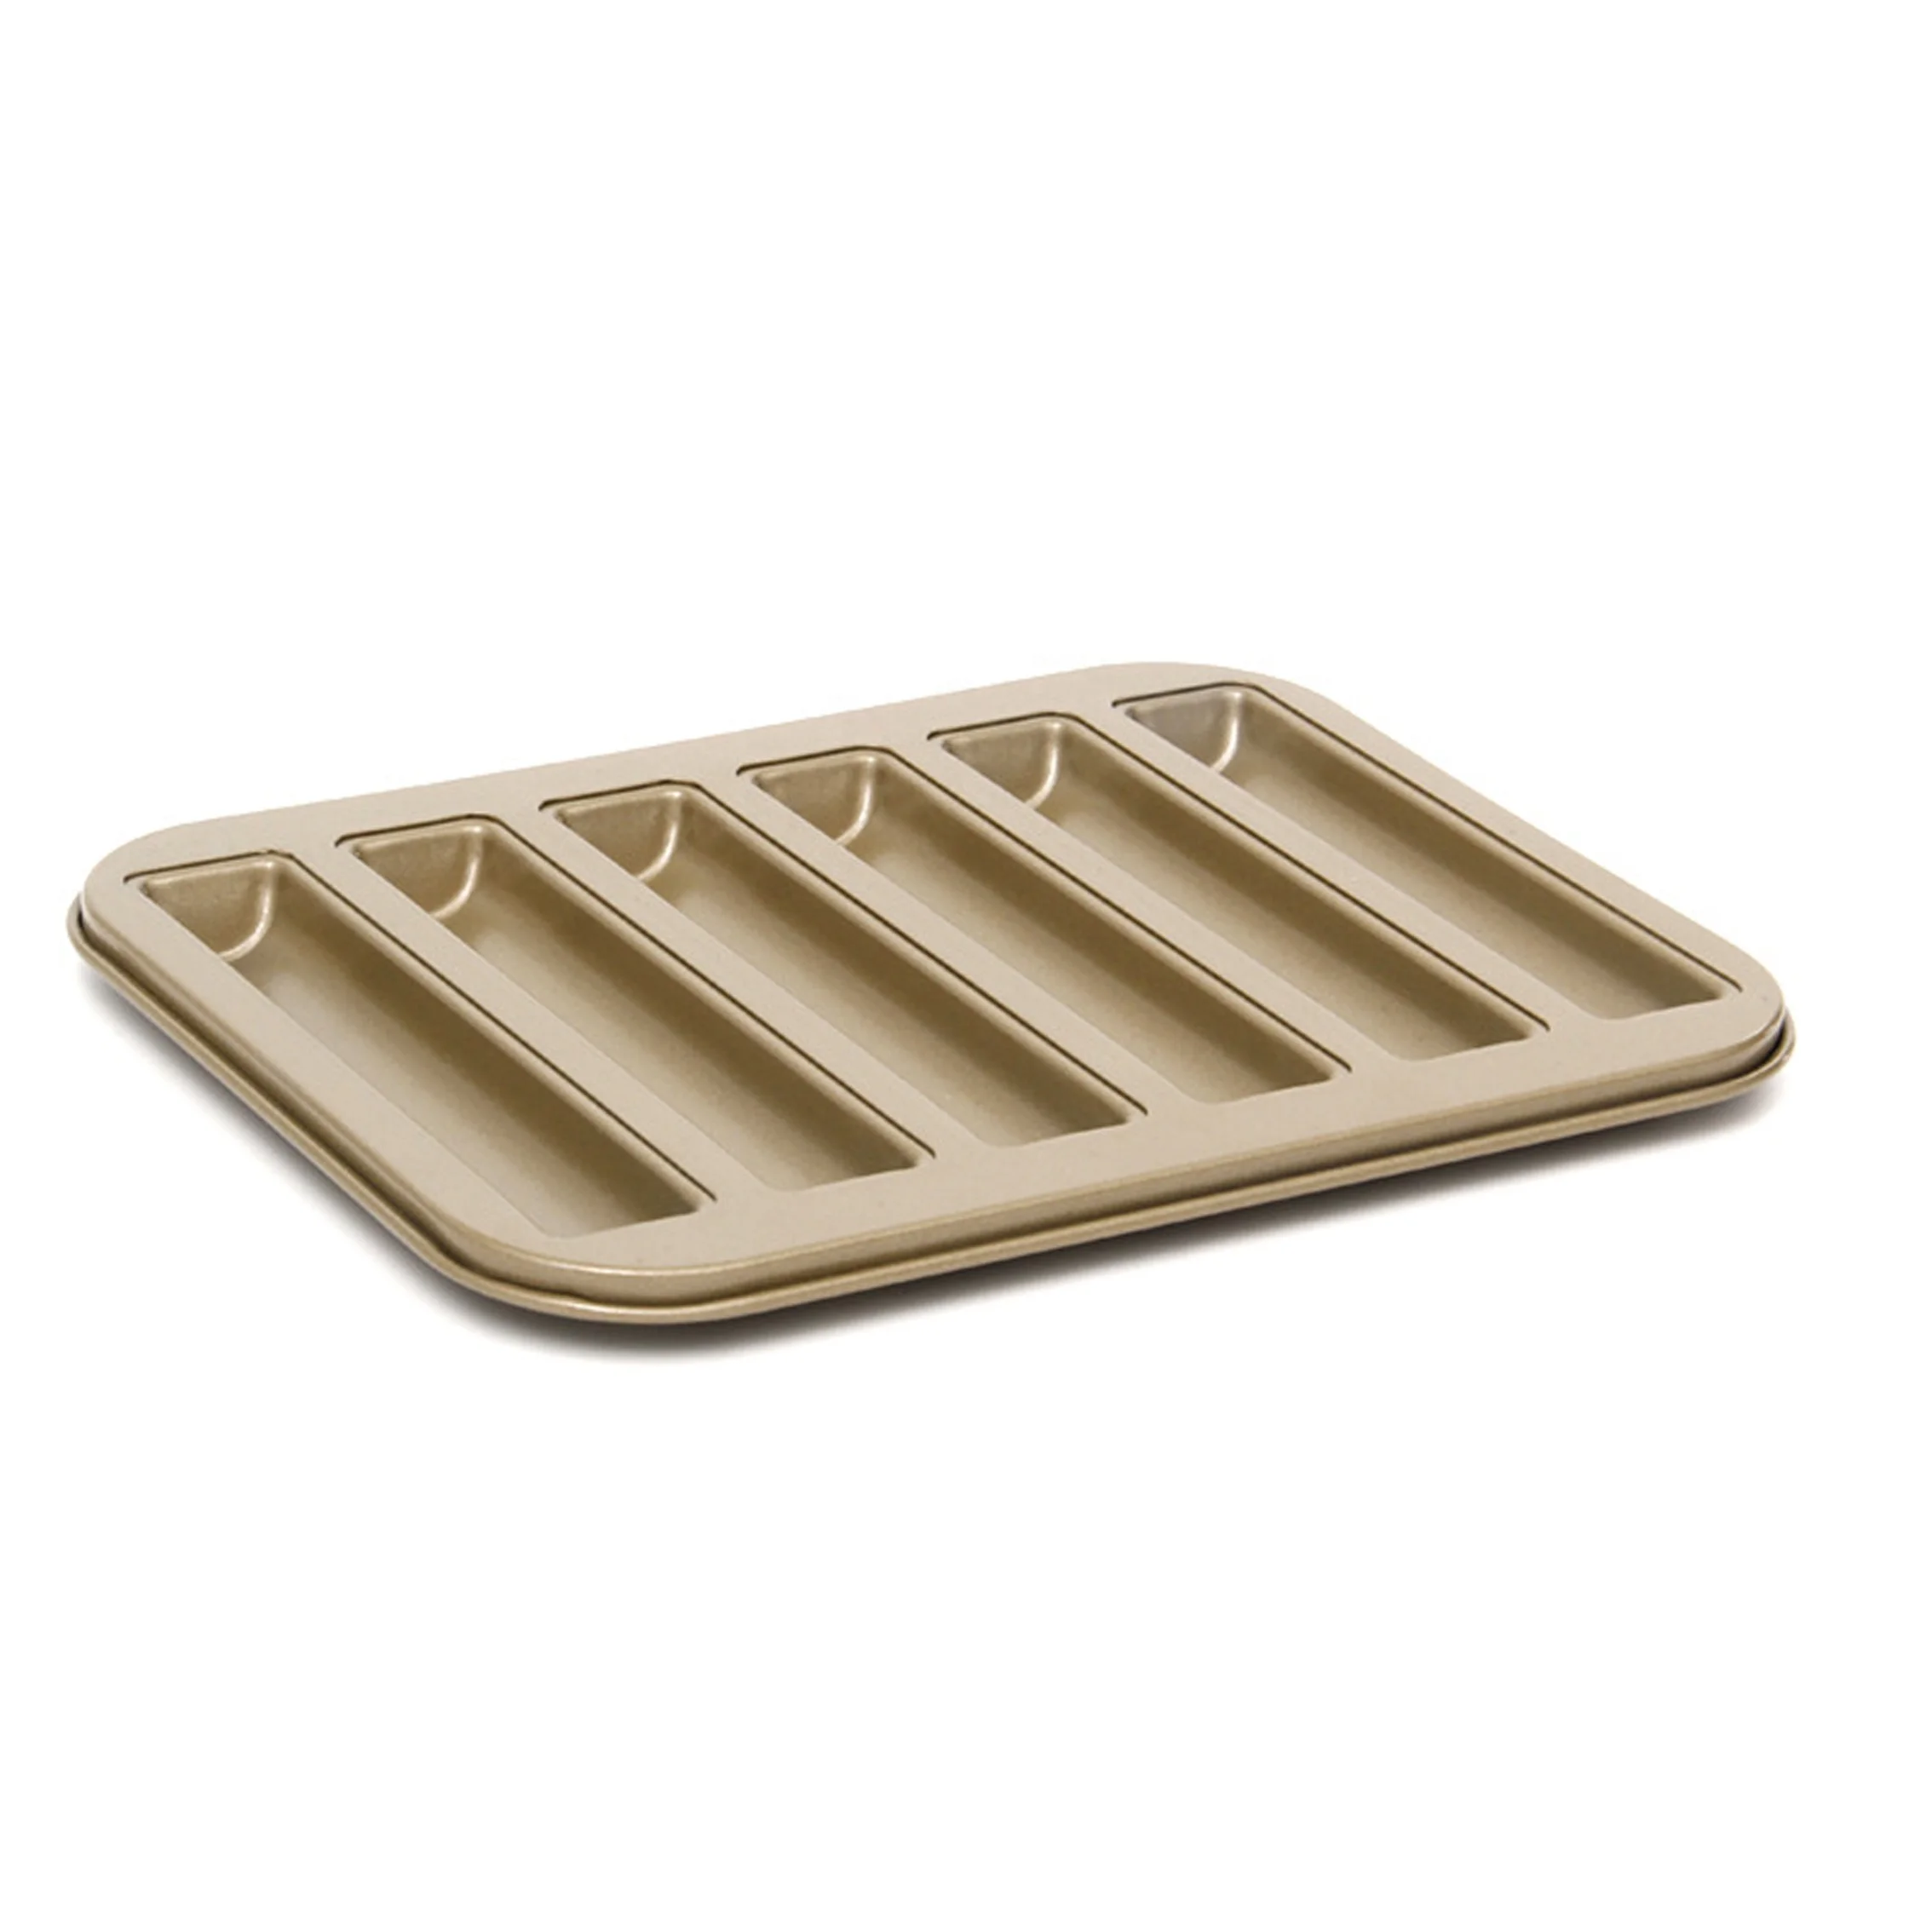 High Quality Bakeware Molds 6 Cups Non Stick Carbon Steel Cookie Baking Pan Cookie Baking Pan Kitchen Accessories Aluminum alloy cake molds